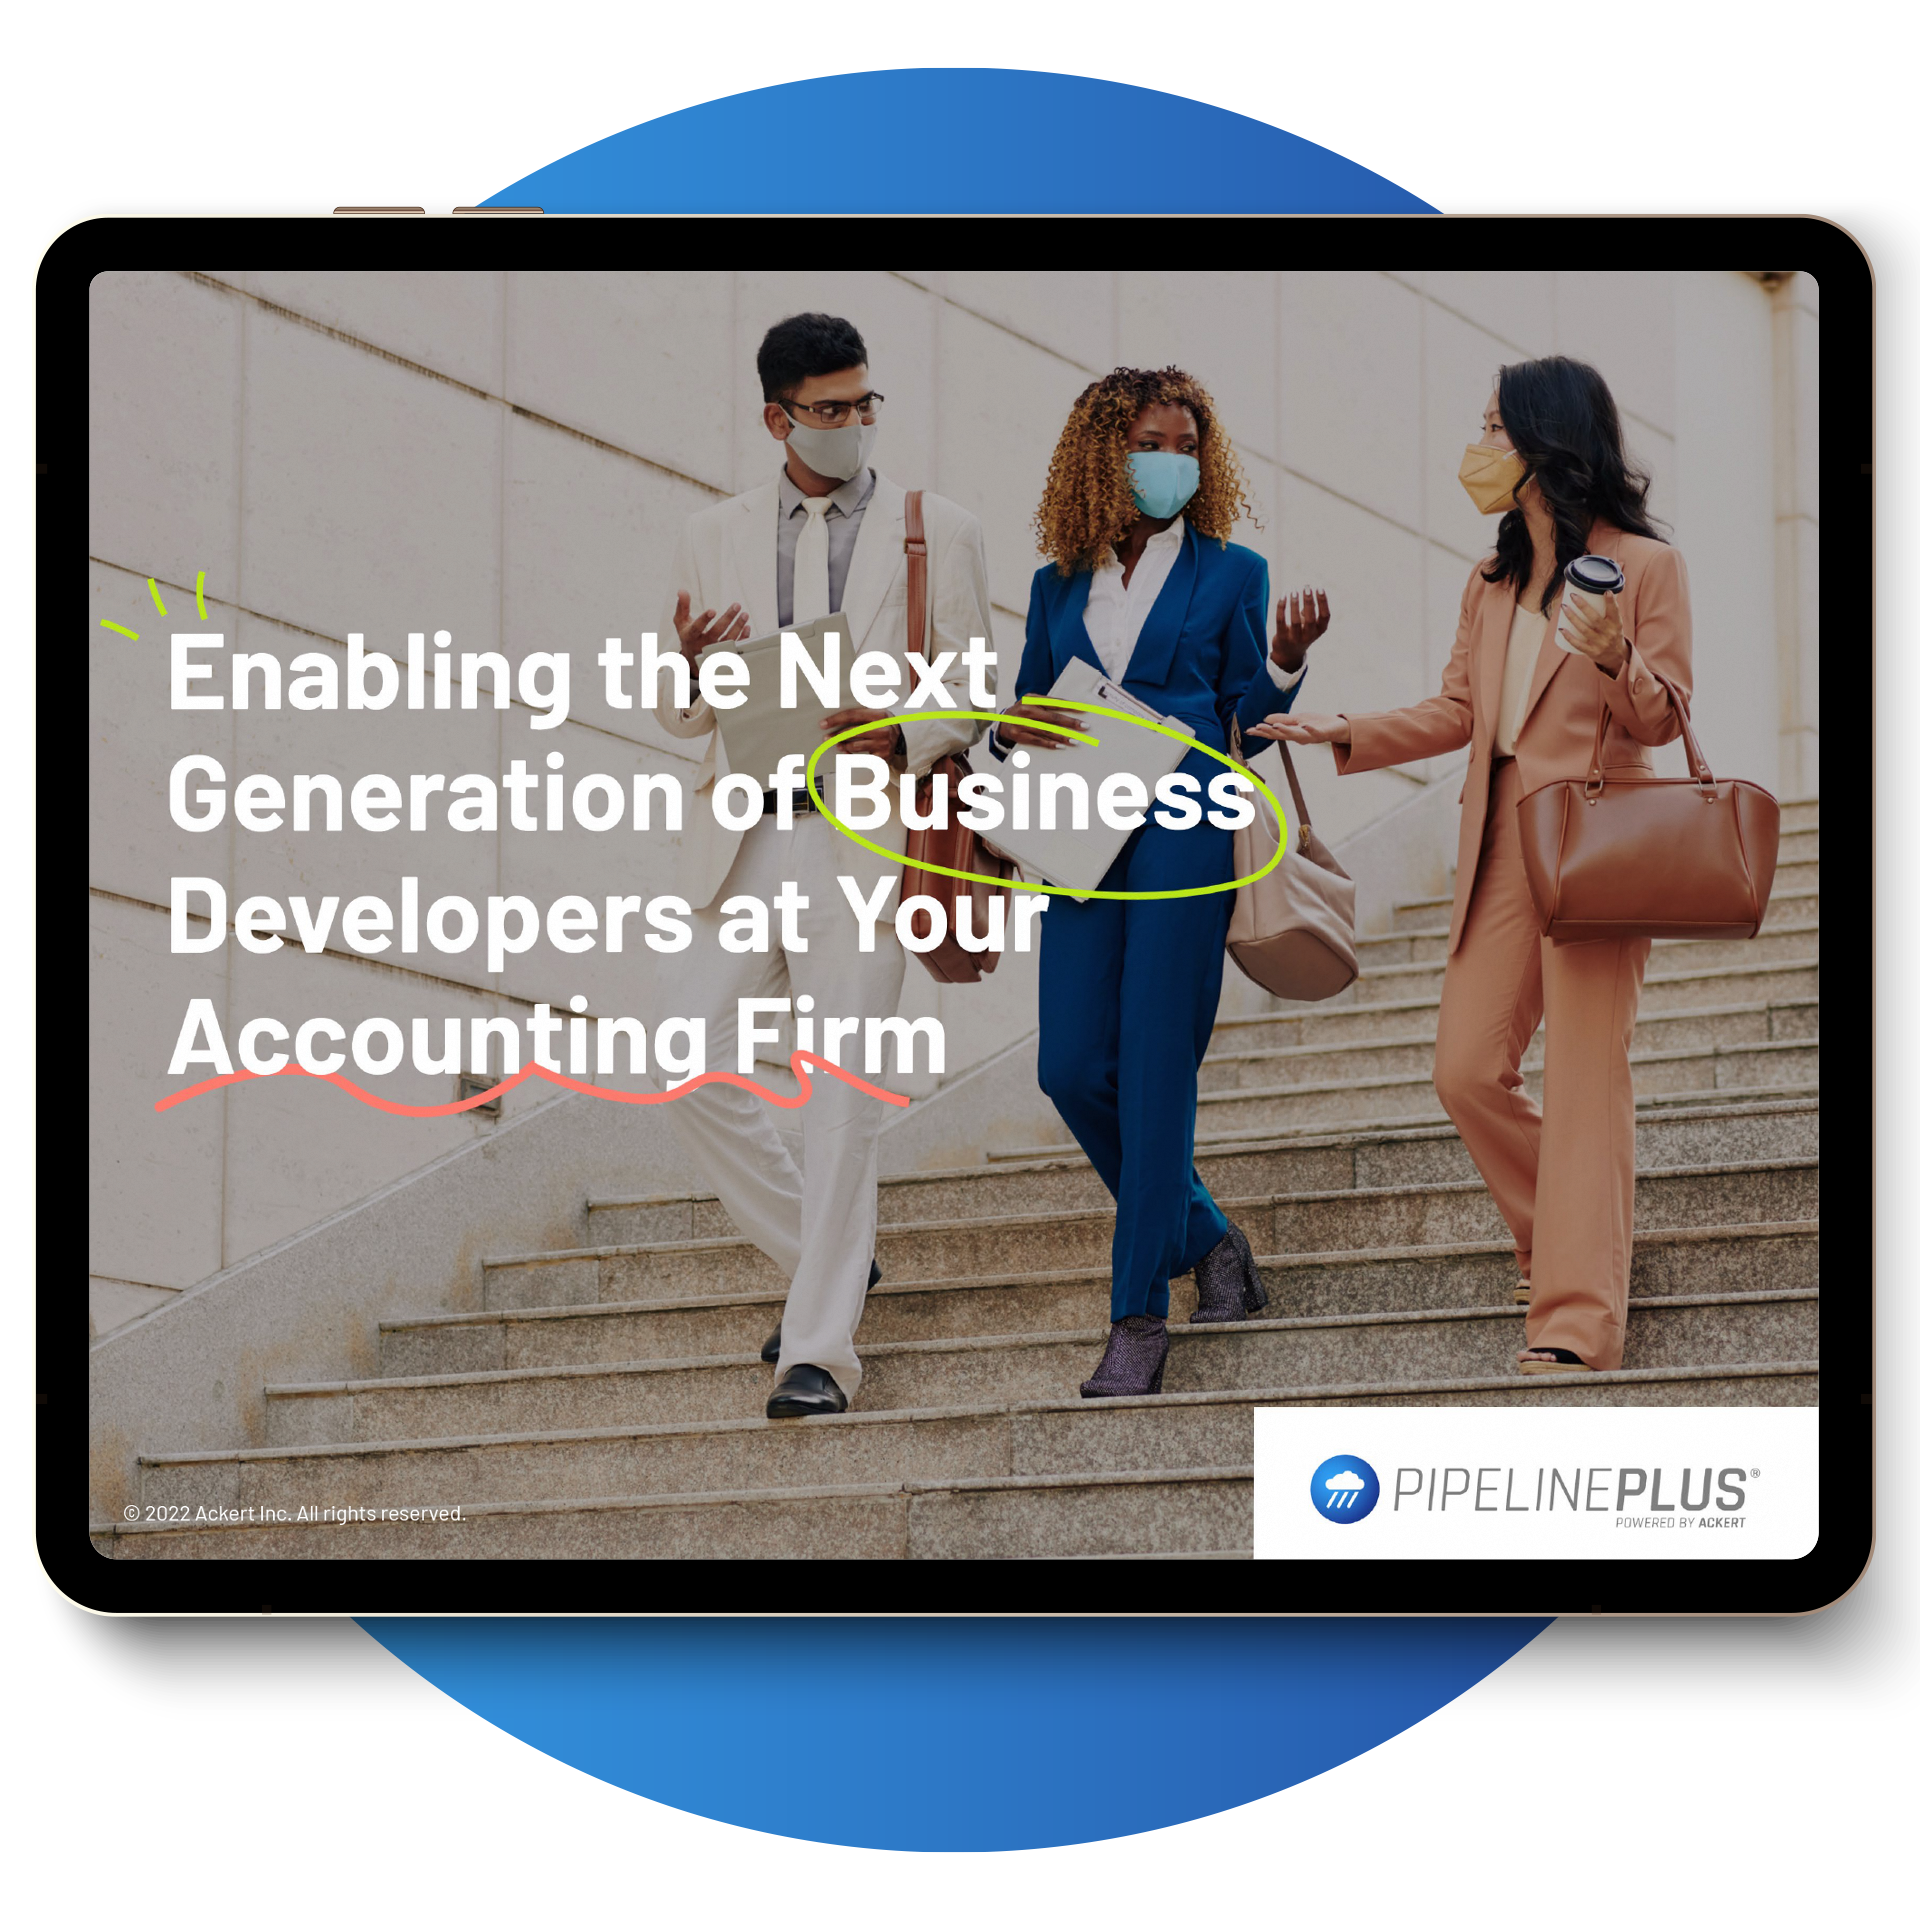 Free Guide Download | Enabling the Next Generation of Business Developers at your Accounting Firm